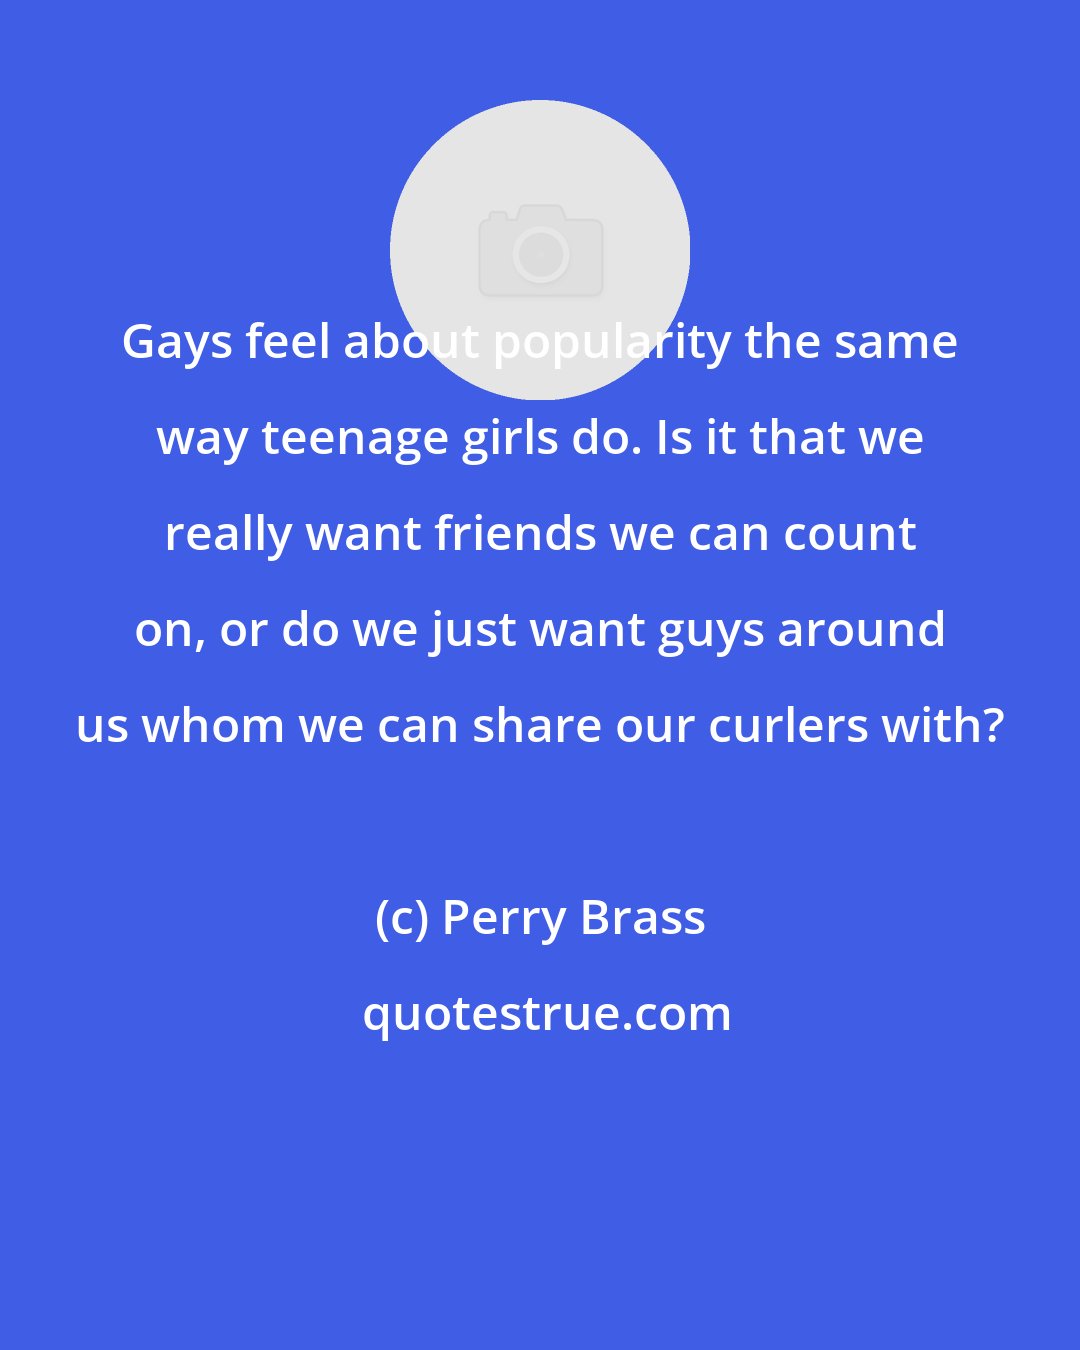 Perry Brass: Gays feel about popularity the same way teenage girls do. Is it that we really want friends we can count on, or do we just want guys around us whom we can share our curlers with?